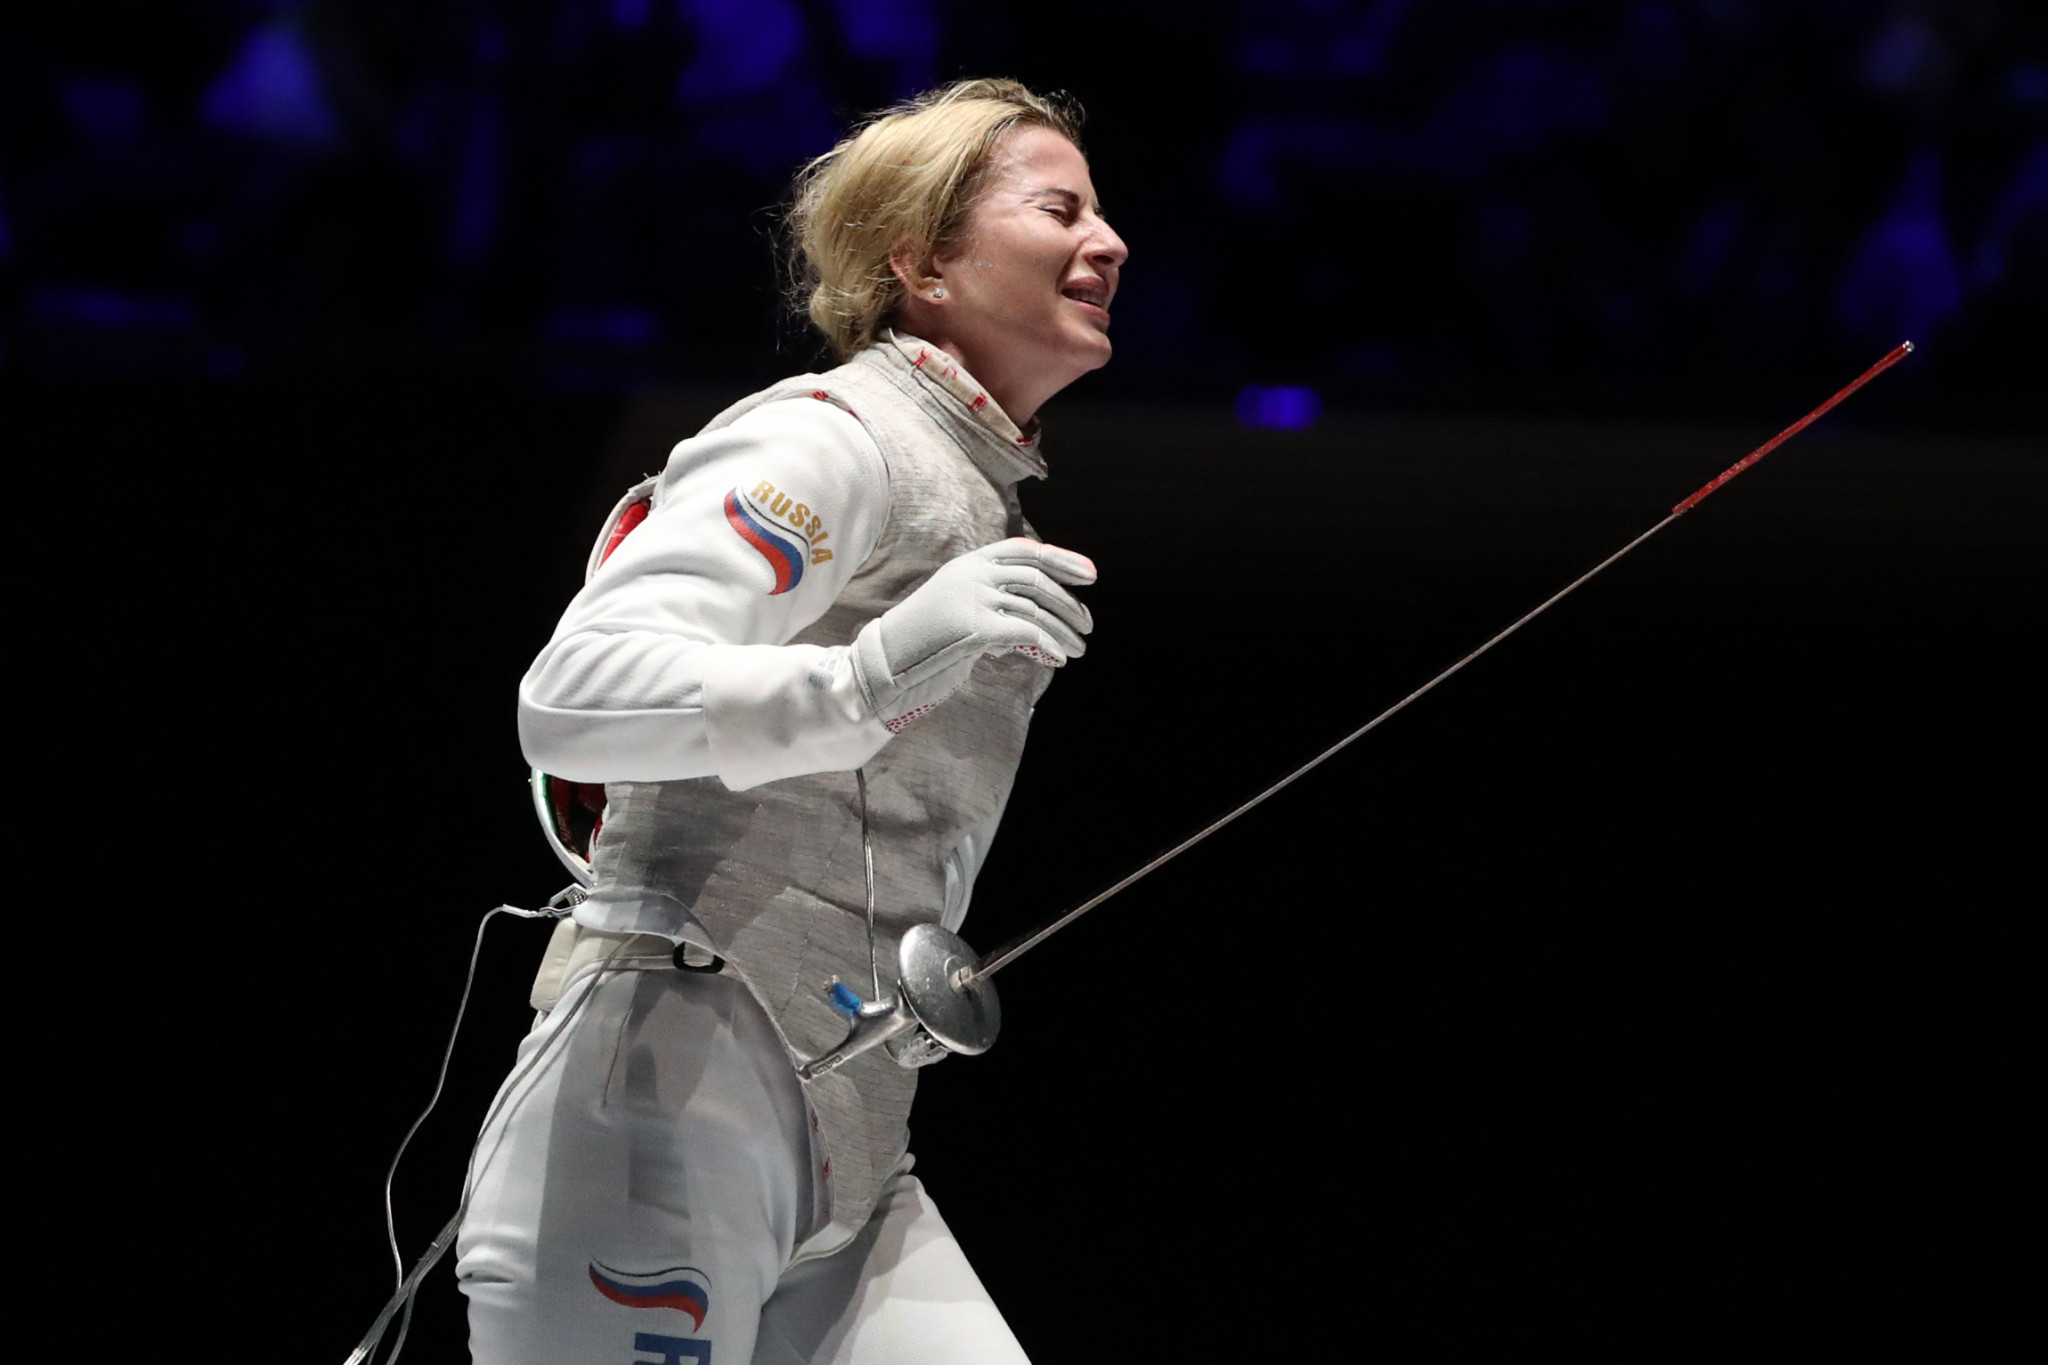 Reigning Olympic champion Inna Deriglazova triumphed at the FIE Women's Foil World Cup ©Getty Images